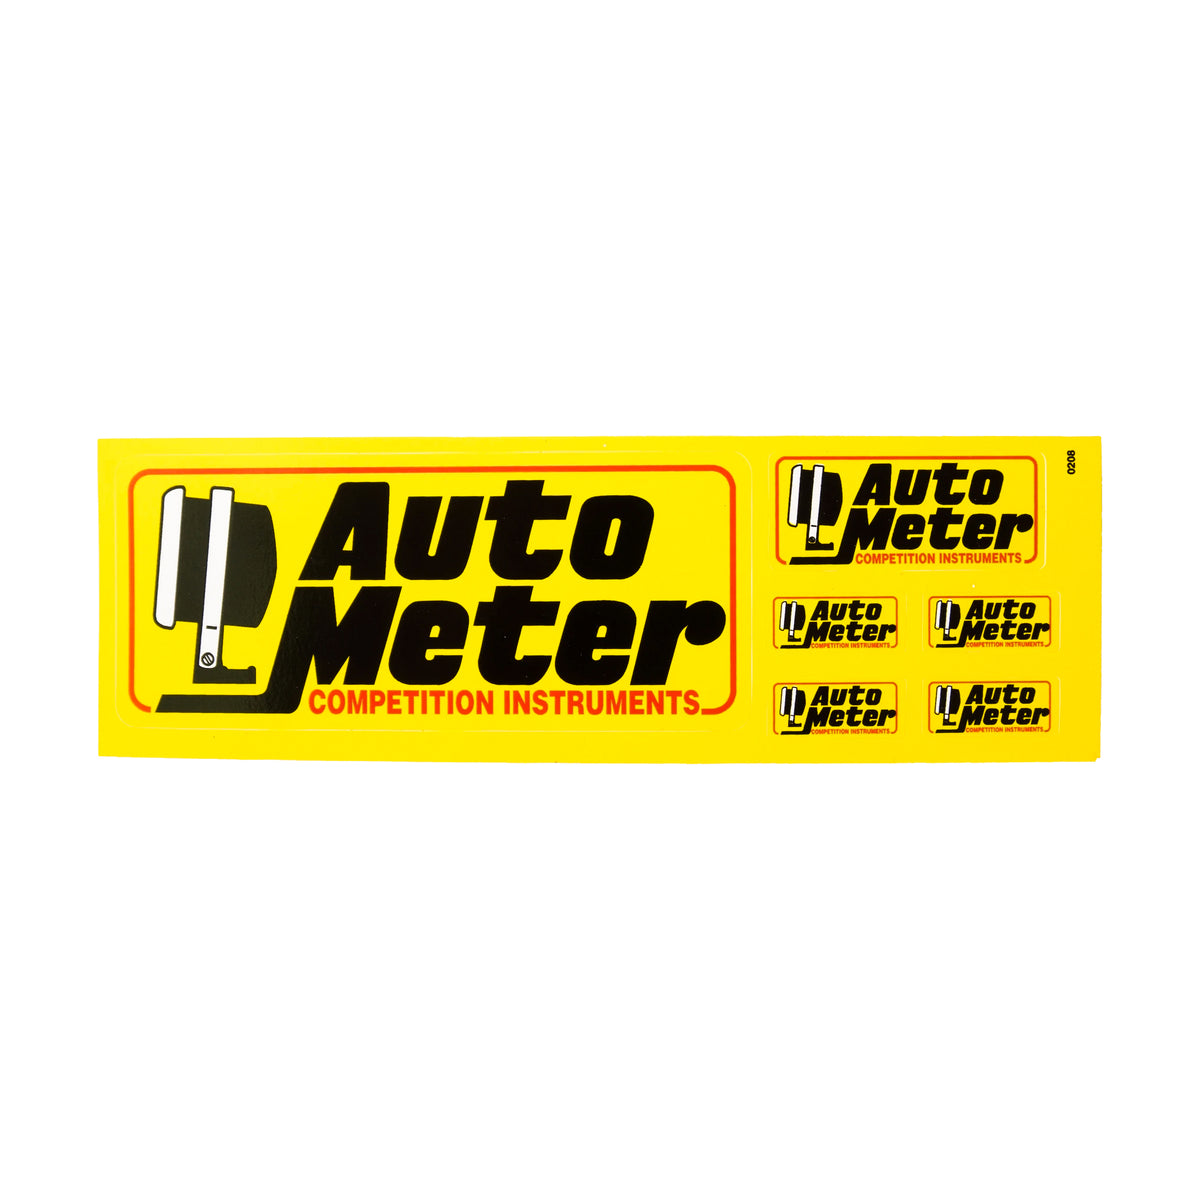 Auto Meter Decal Sheet – The Official FNA Store